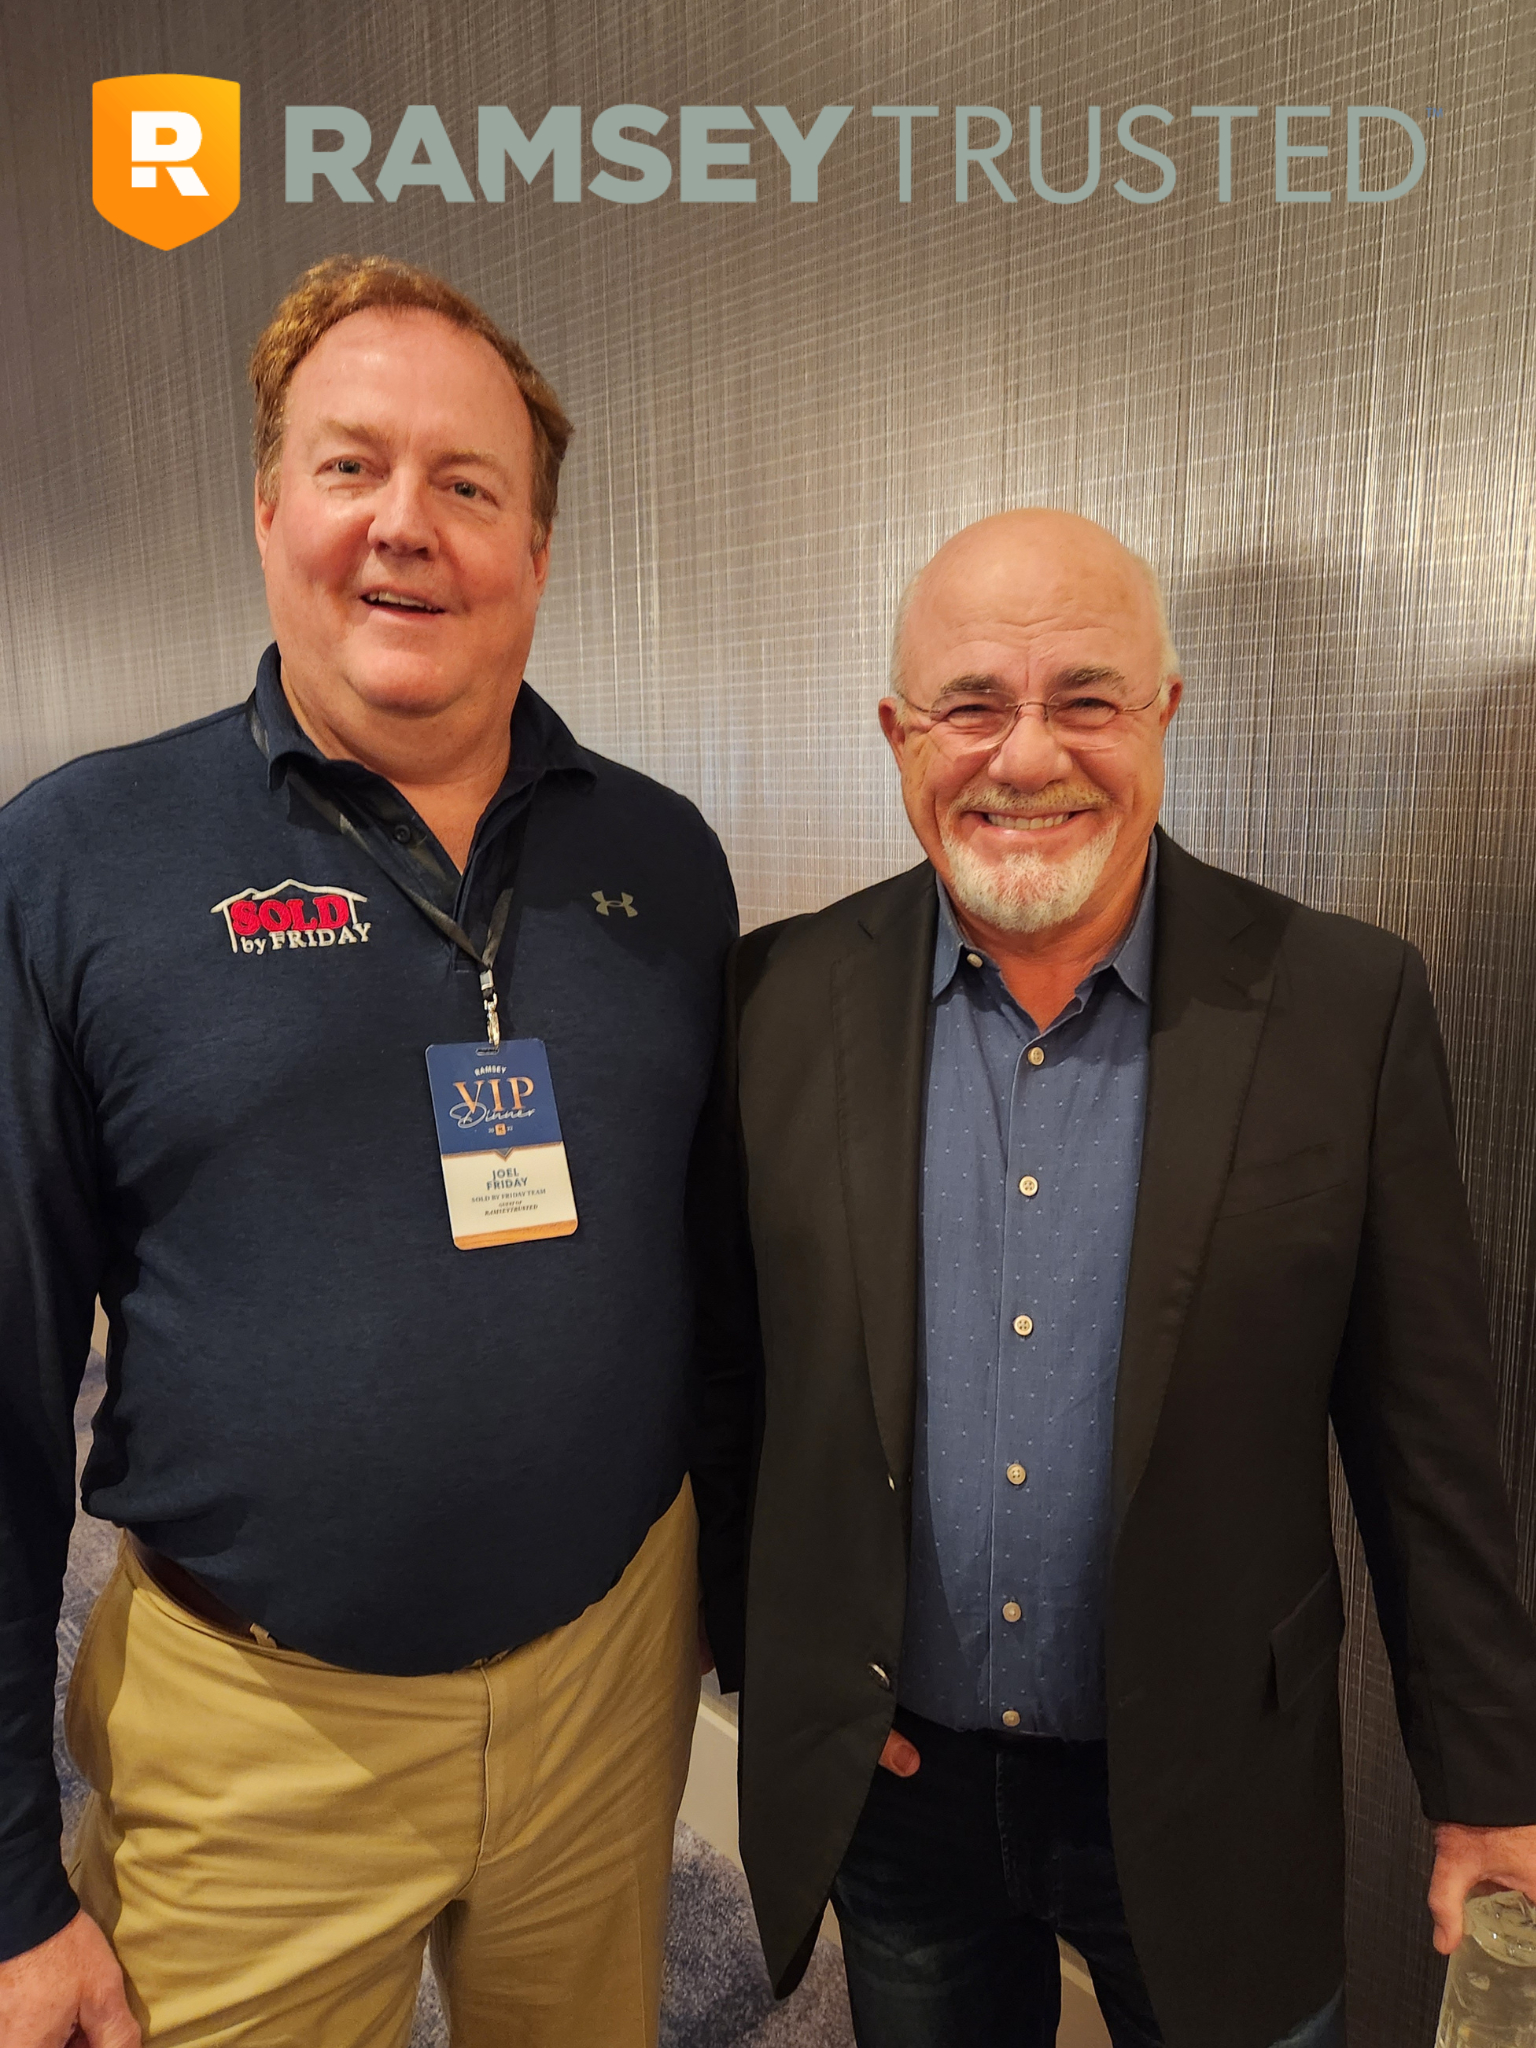 Dave_Ramsey_and_Joel_Friday_your_Ramsey_Trusted_realtor.jpg